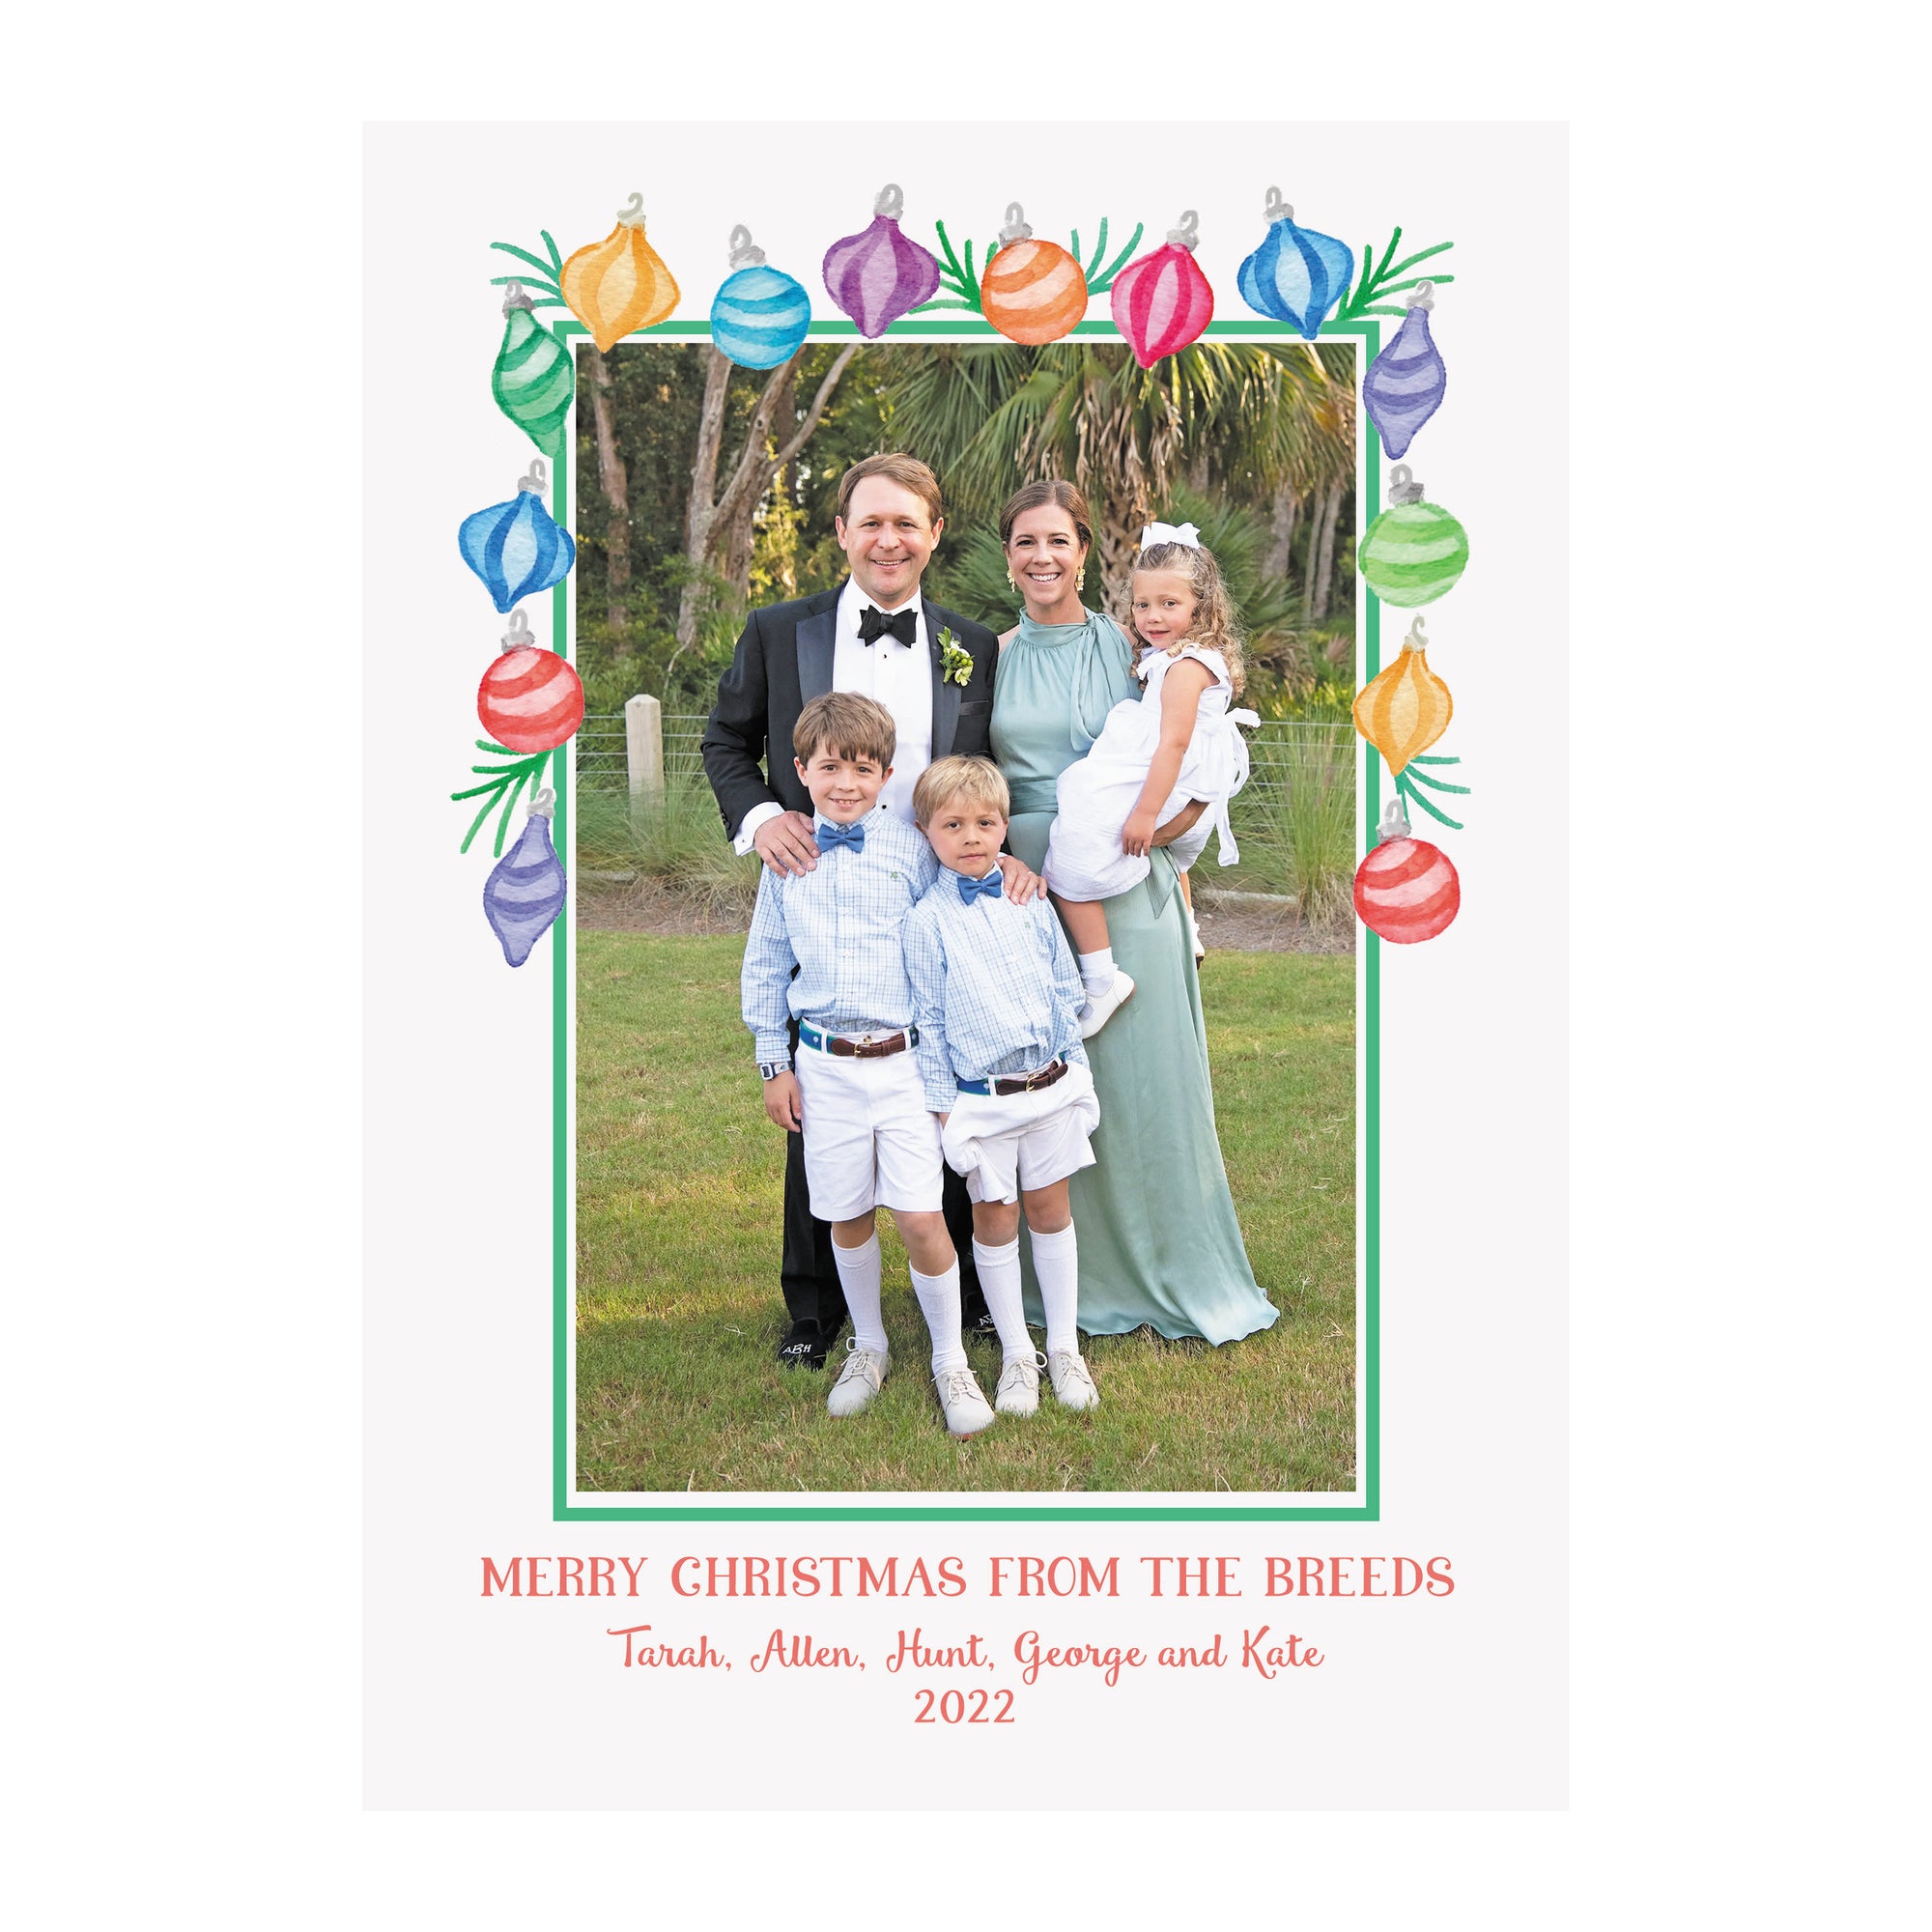 Ornament Garland Holiday Photo Cards